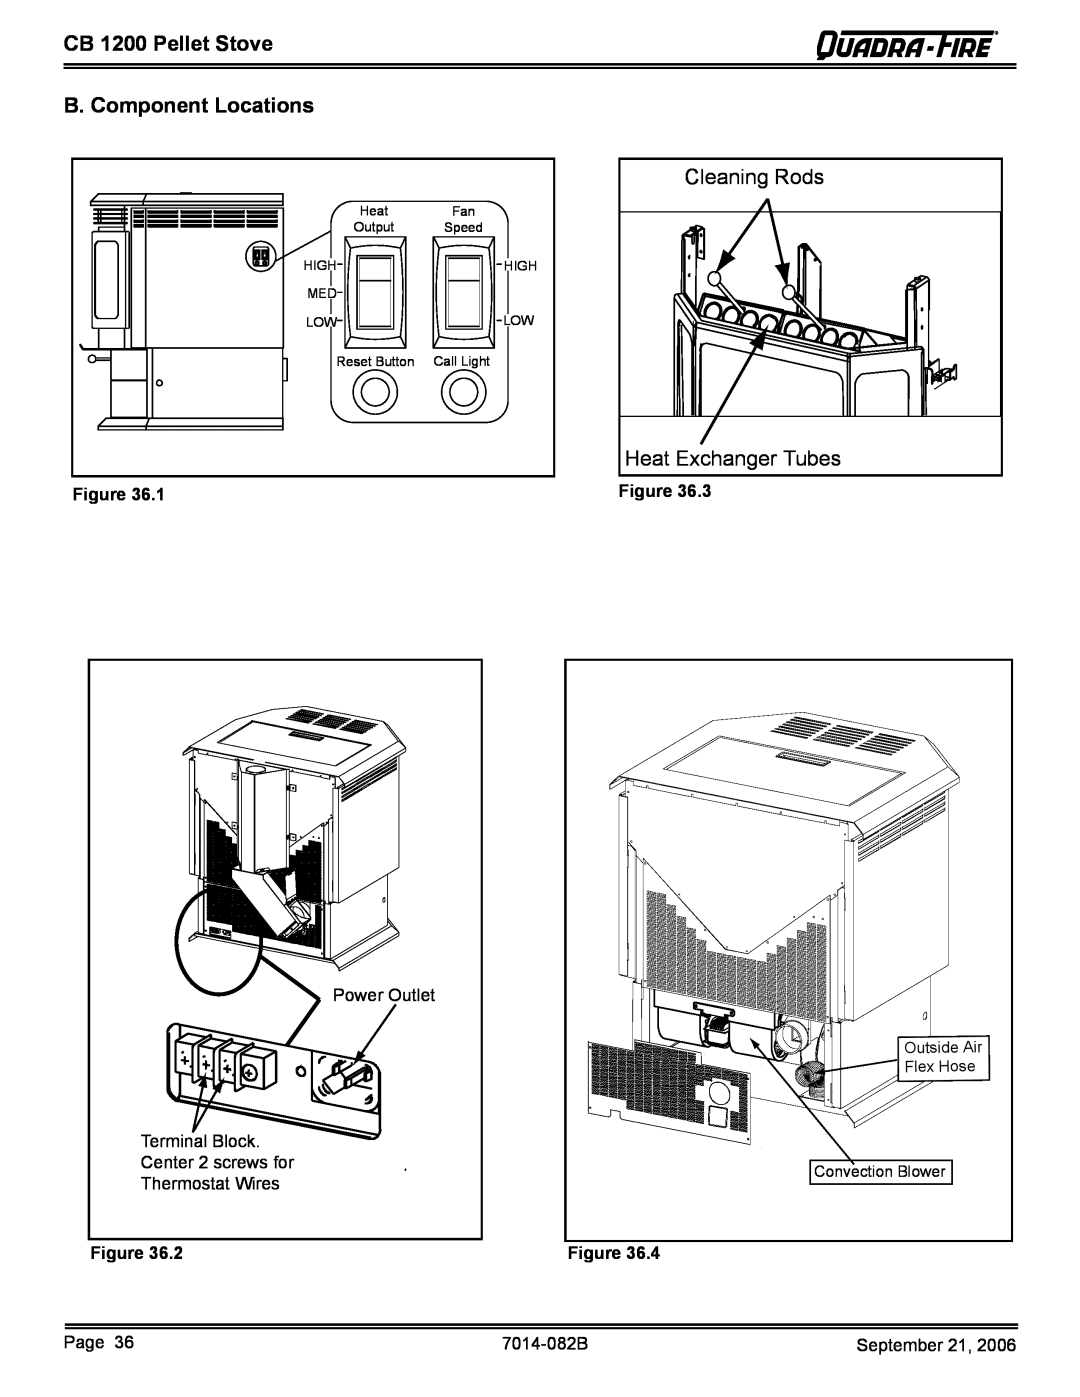 Quadra-Fire CB1200 CB 1200 Pellet Stove B. Component Locations, Cleaning Rods Heat Exchanger Tubes, Output, Speed 